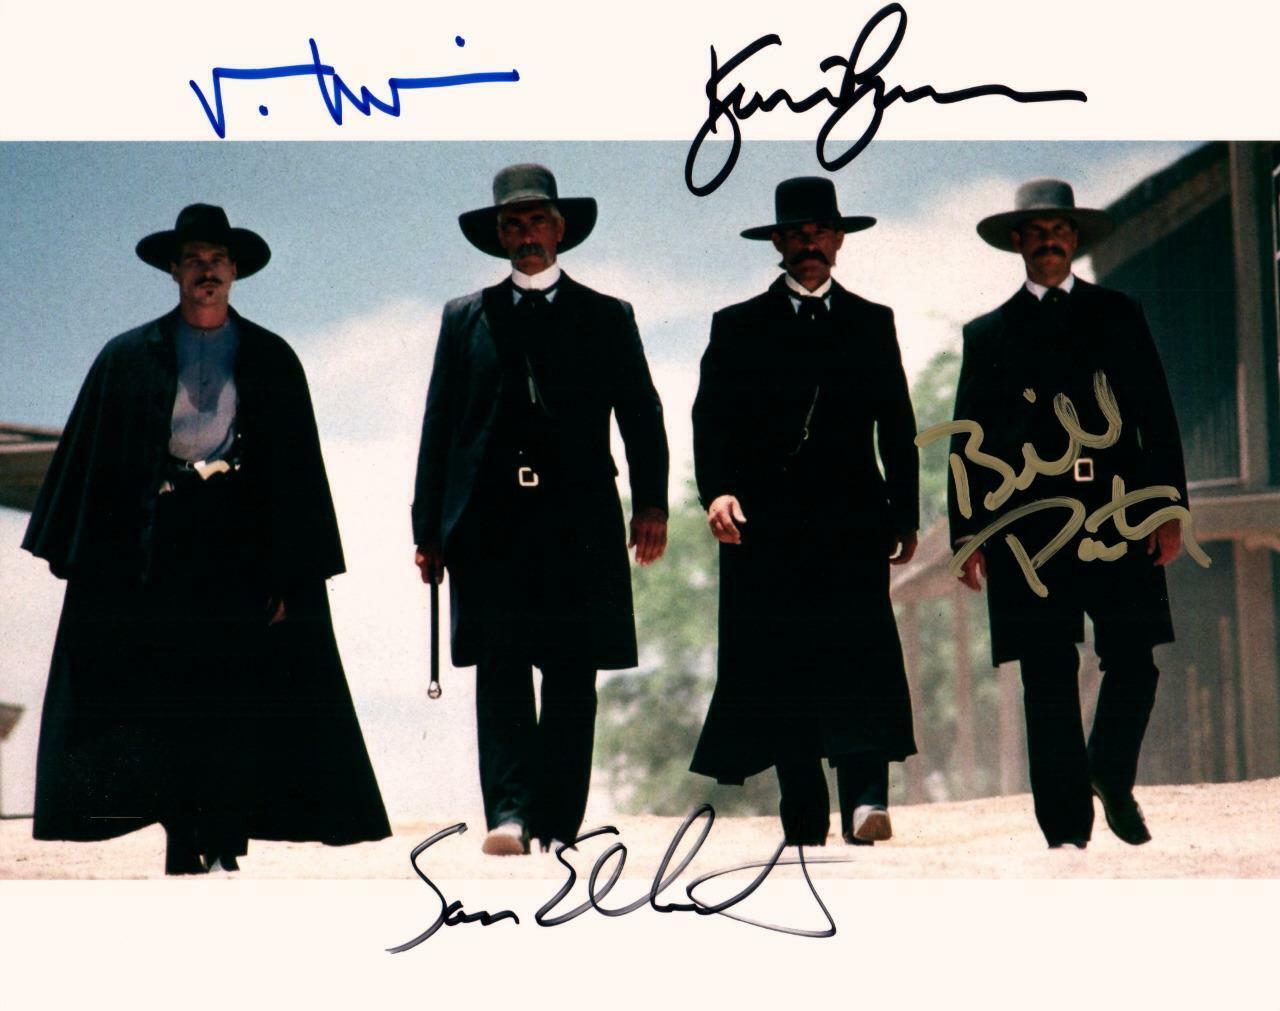 Sam Elliott Paxton Kilmer Russell signed 8x10 Photo Poster painting Picture autographed and COA